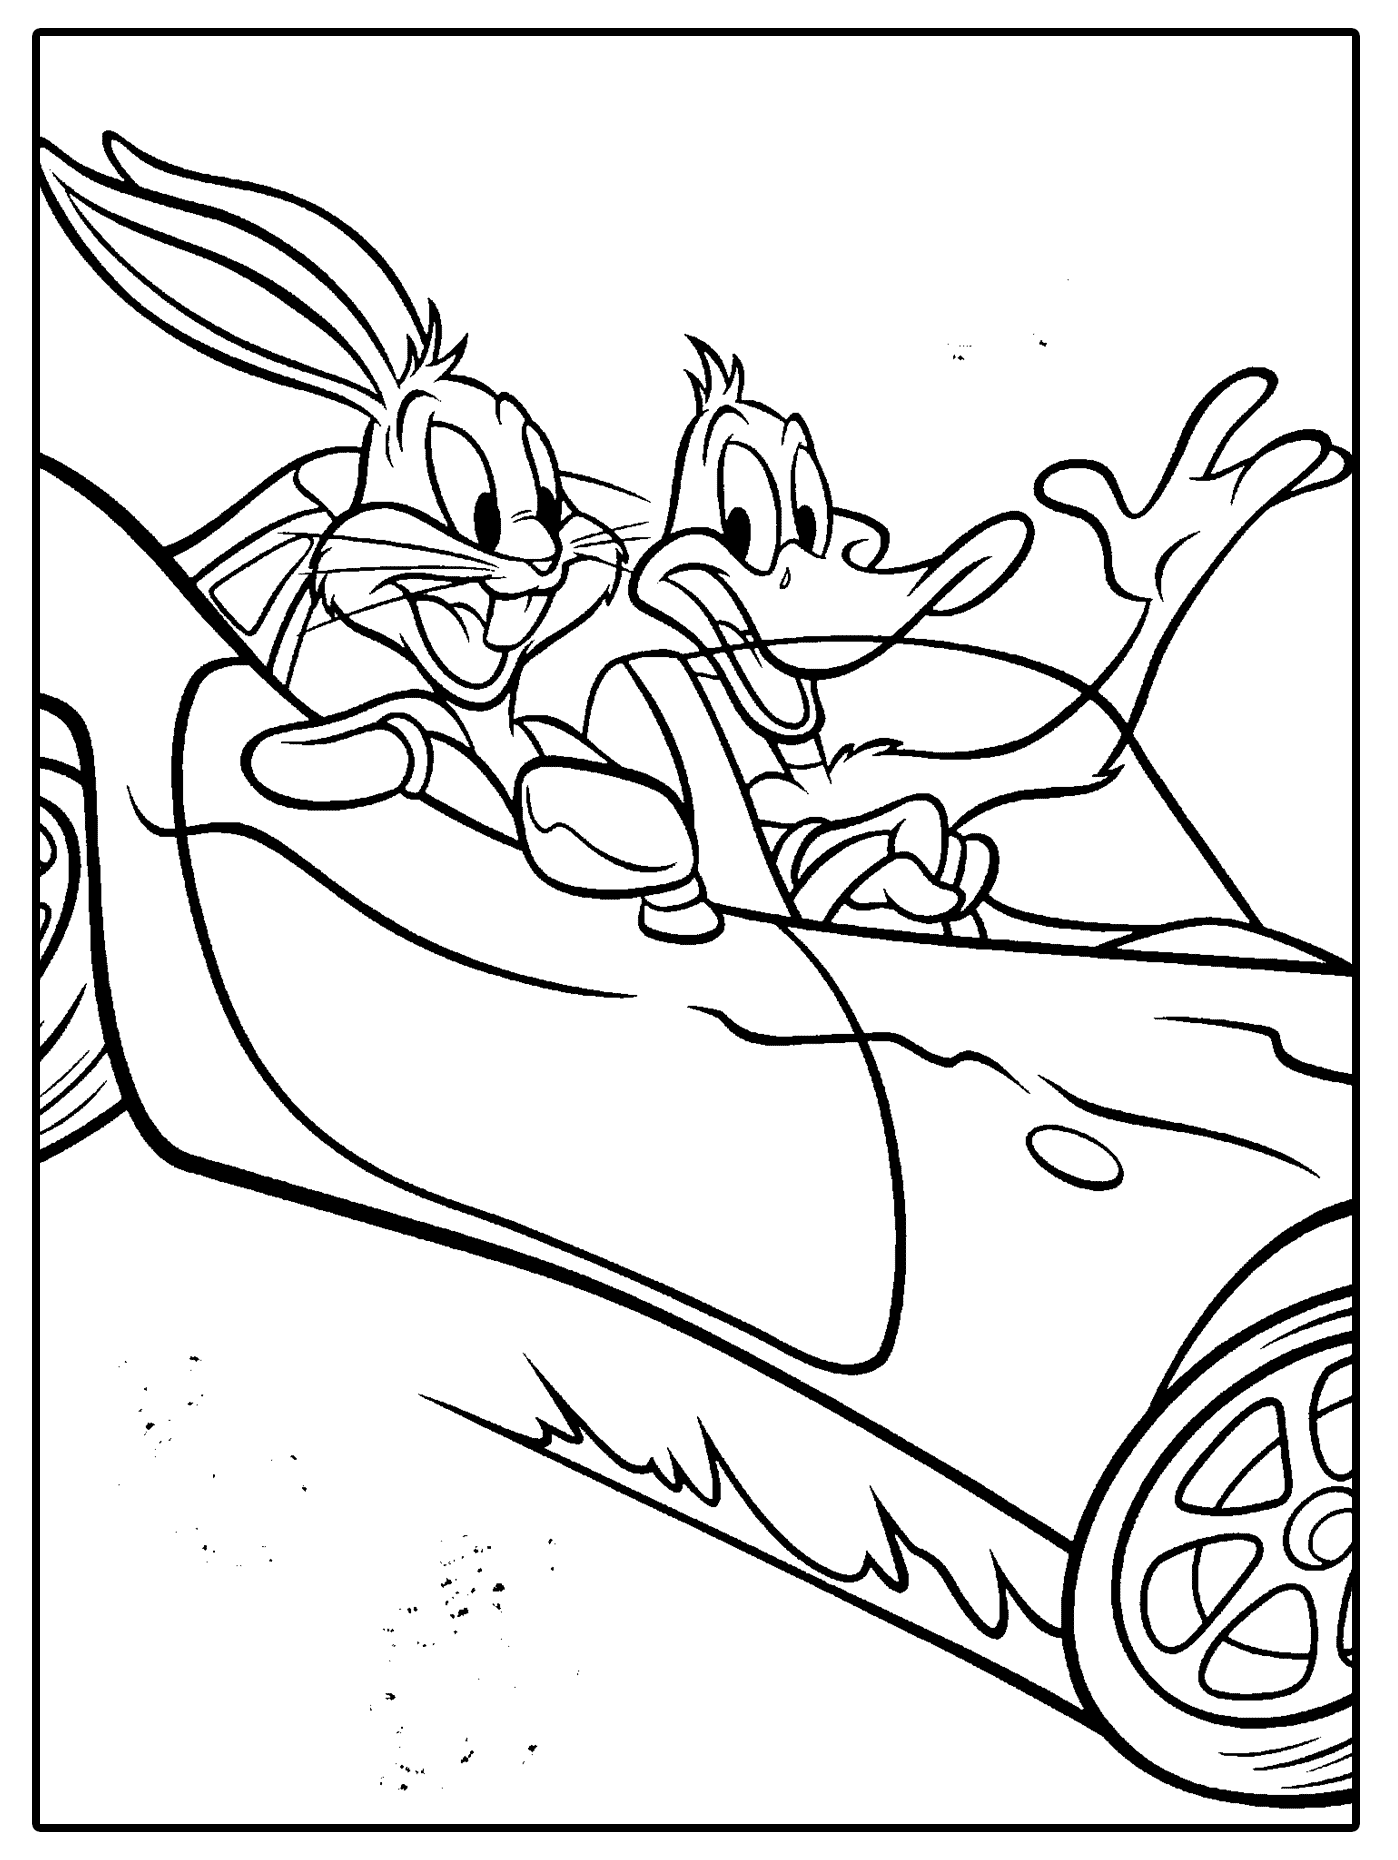 Looney Tunes Characters coloring